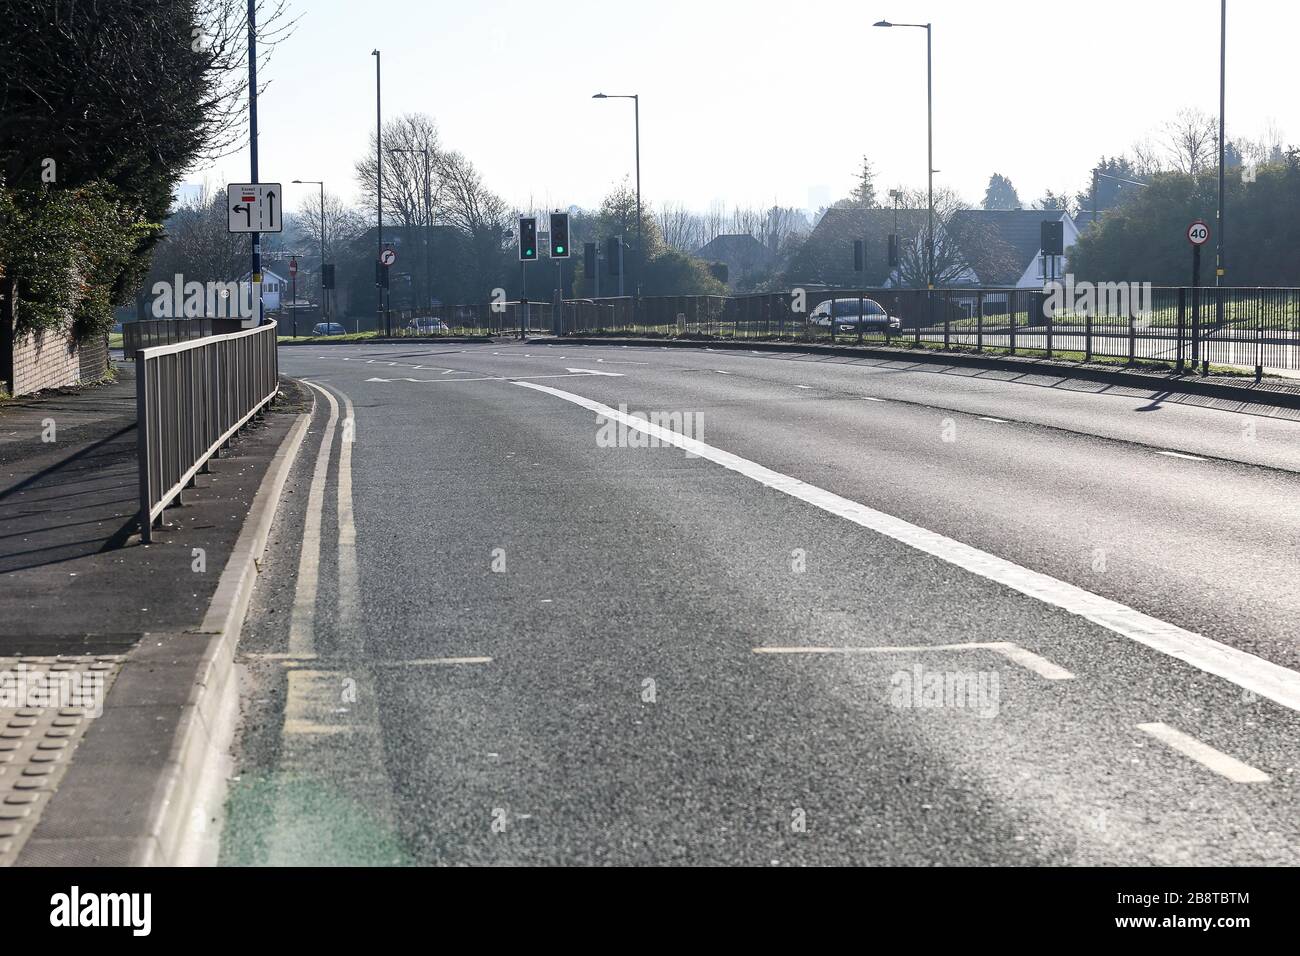 Birmingham, West Midlands, UK. 23rd Mar, 2020. Birmingham's arterial commuter routes are very quiet on the first Monday morning after people are staying at home. The Hagley Road is normally clogged with traffic. Credit: Peter Lopeman/Alamy Live News Stock Photo